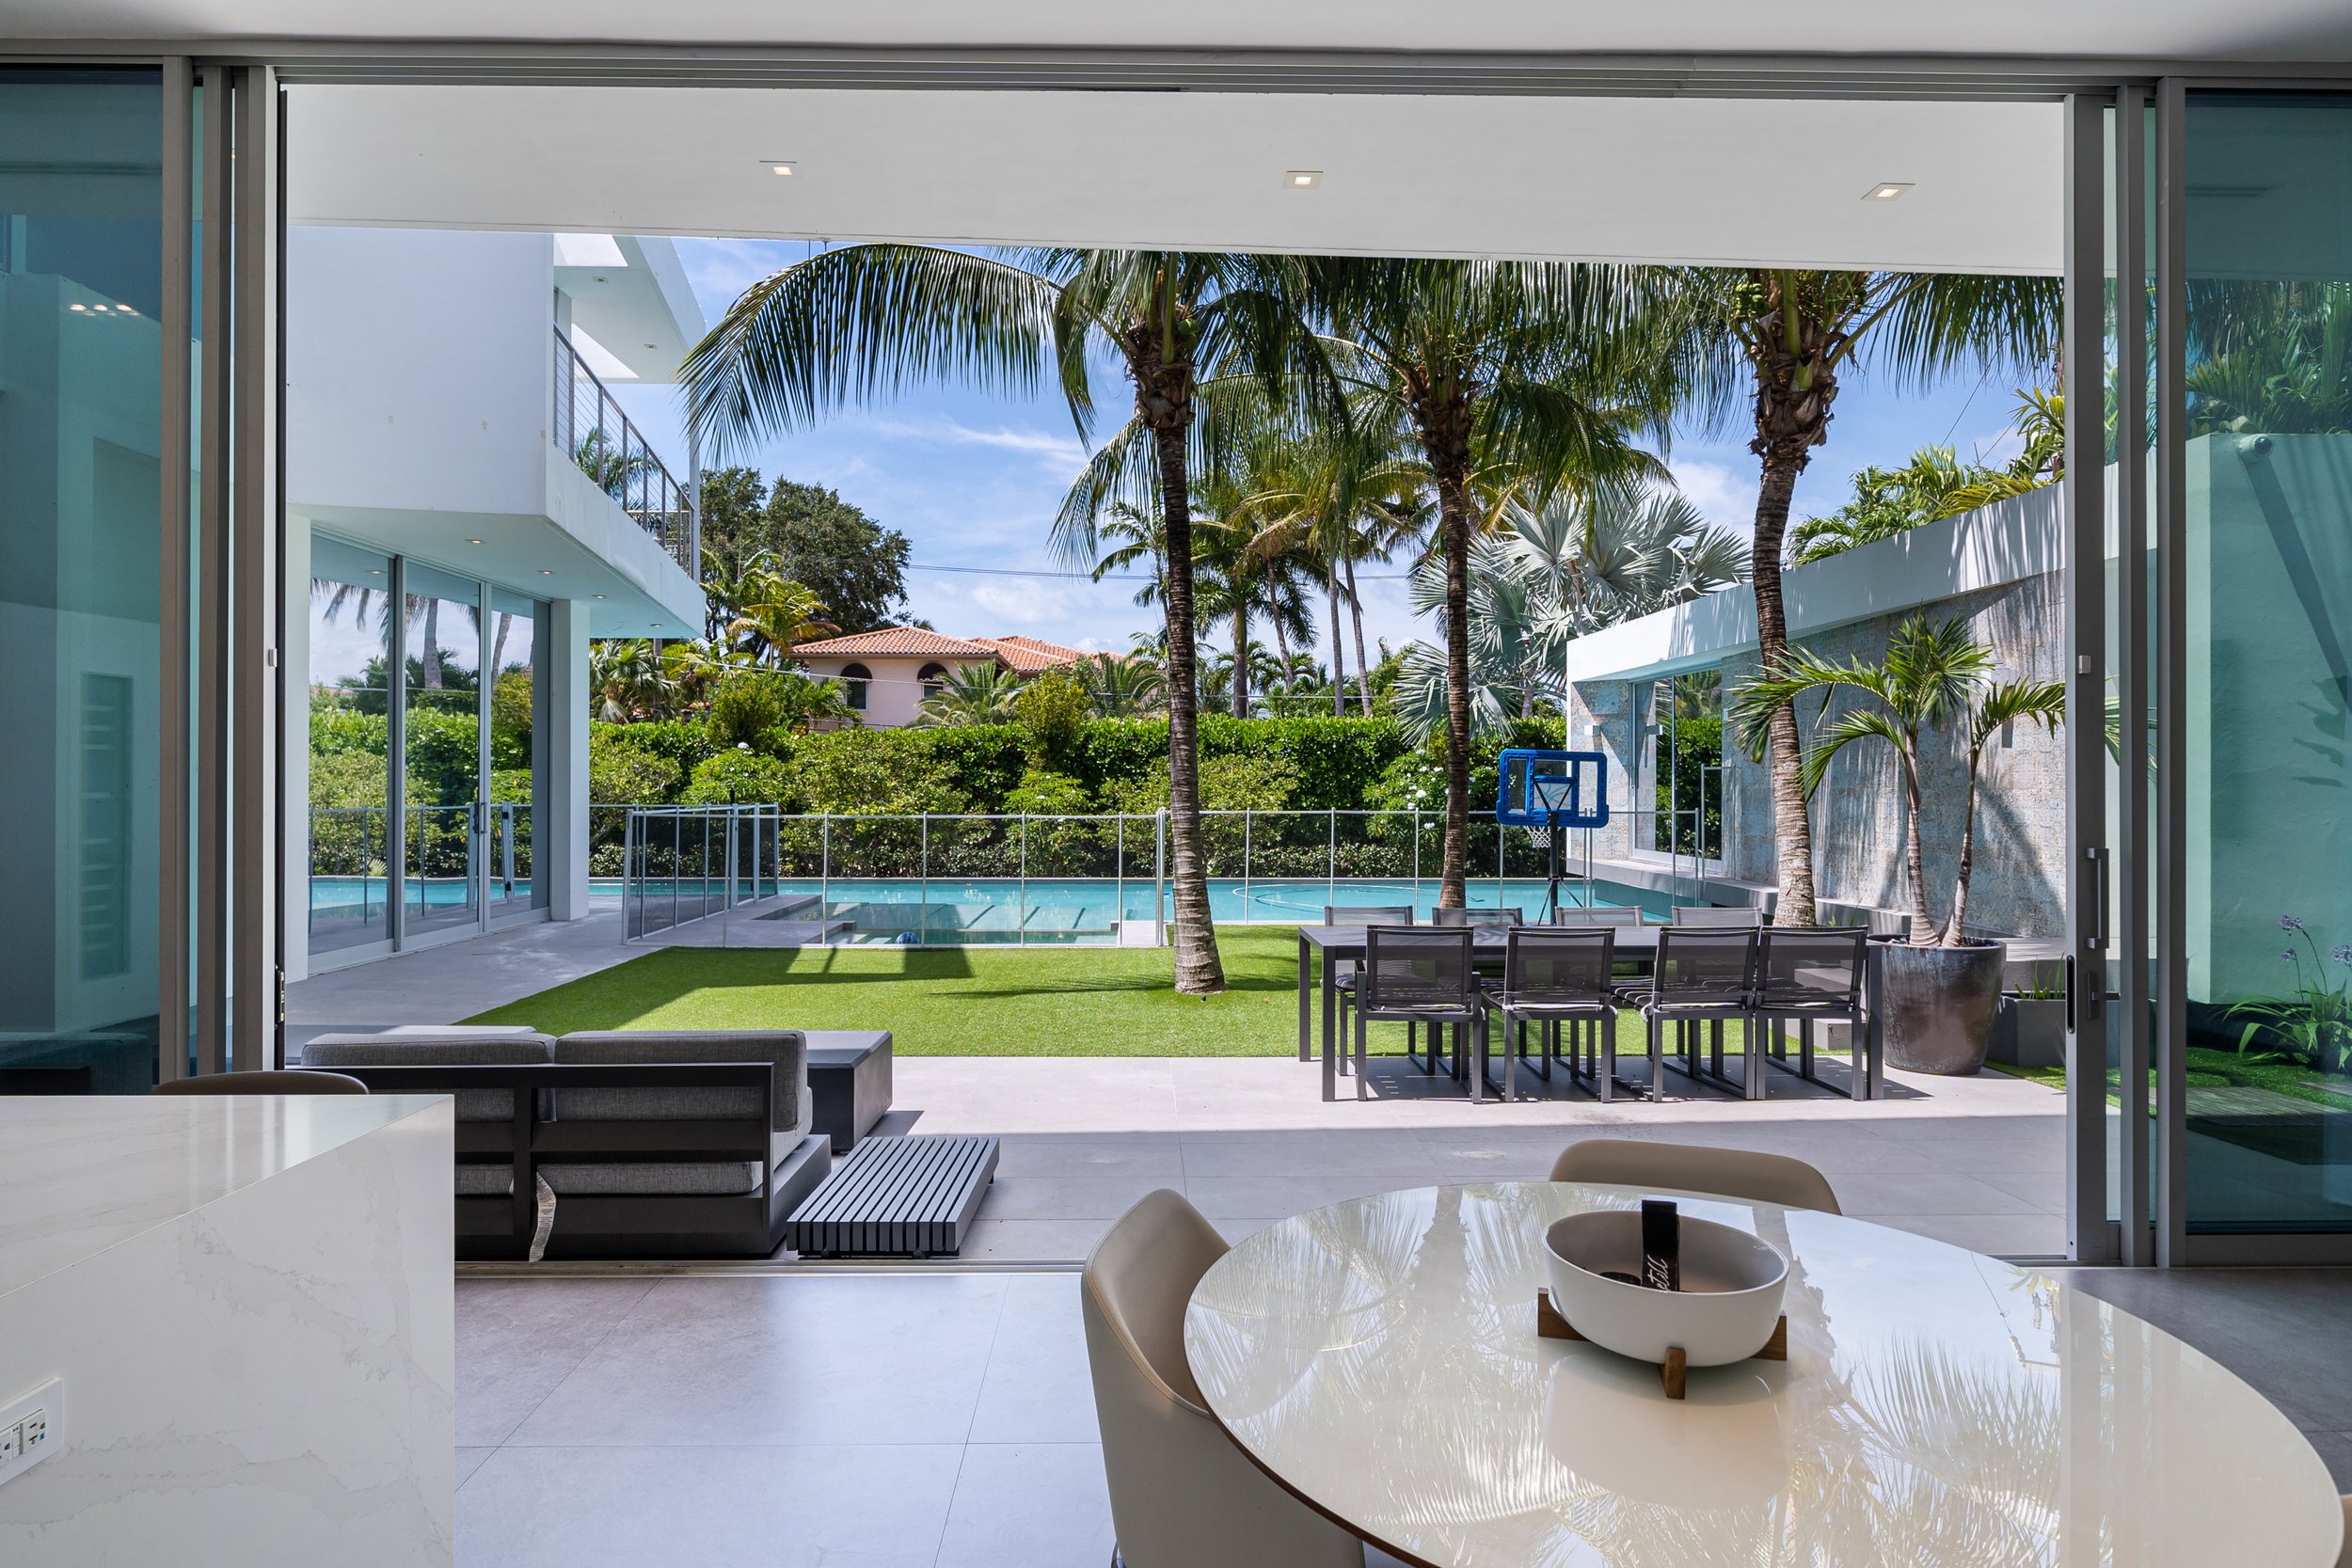 Miami Heat Star Victor Oladipo Lists Hibiscus Island Contemporary For $10 Million Amidst NBA Finals 9.jpg